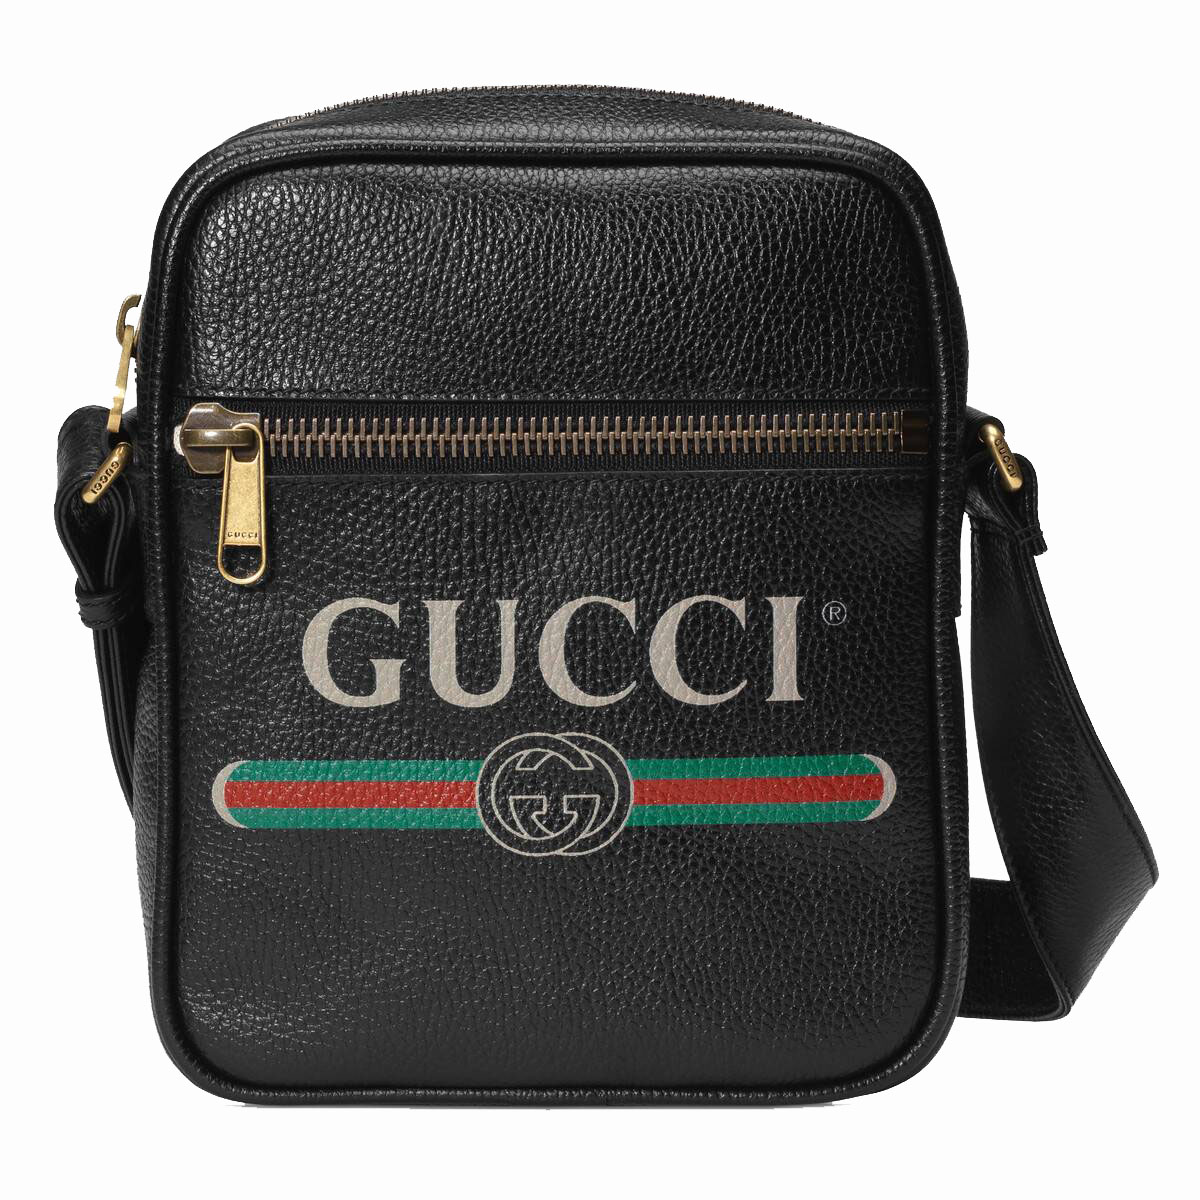 gucci logo on bags